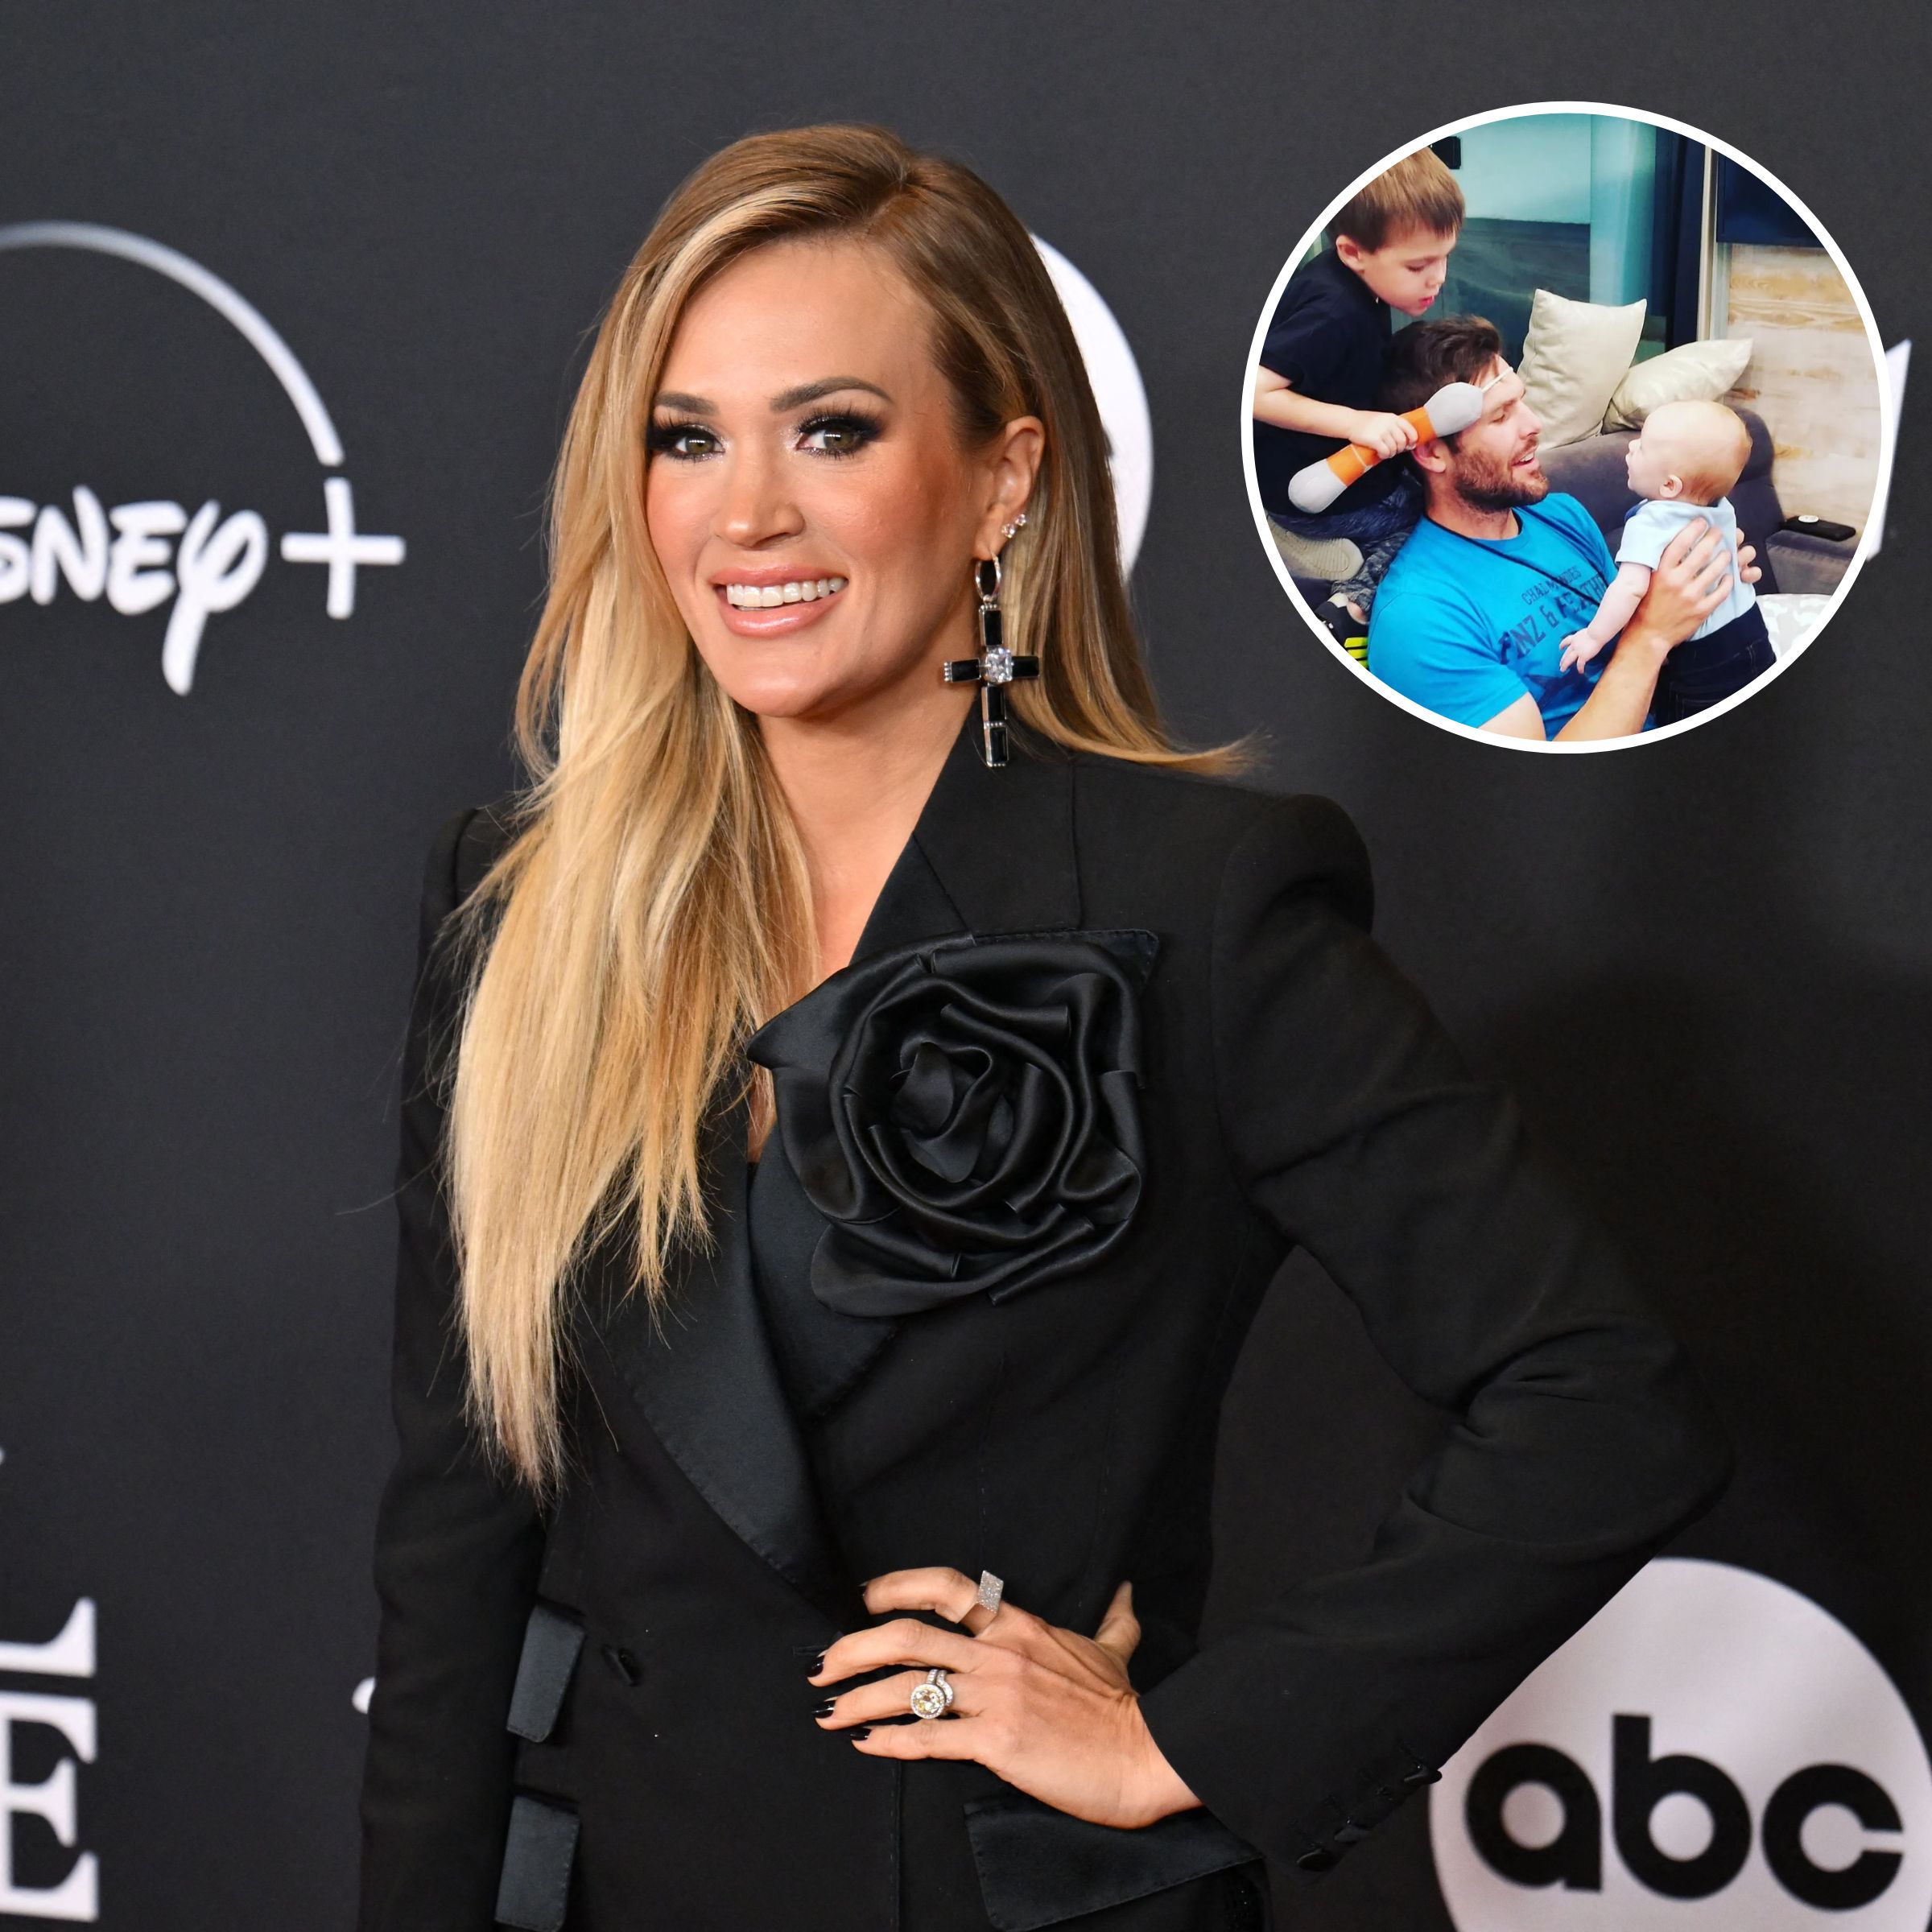 Carrie Underwood and Mike Fisher's Cutest Photos With Their Kids